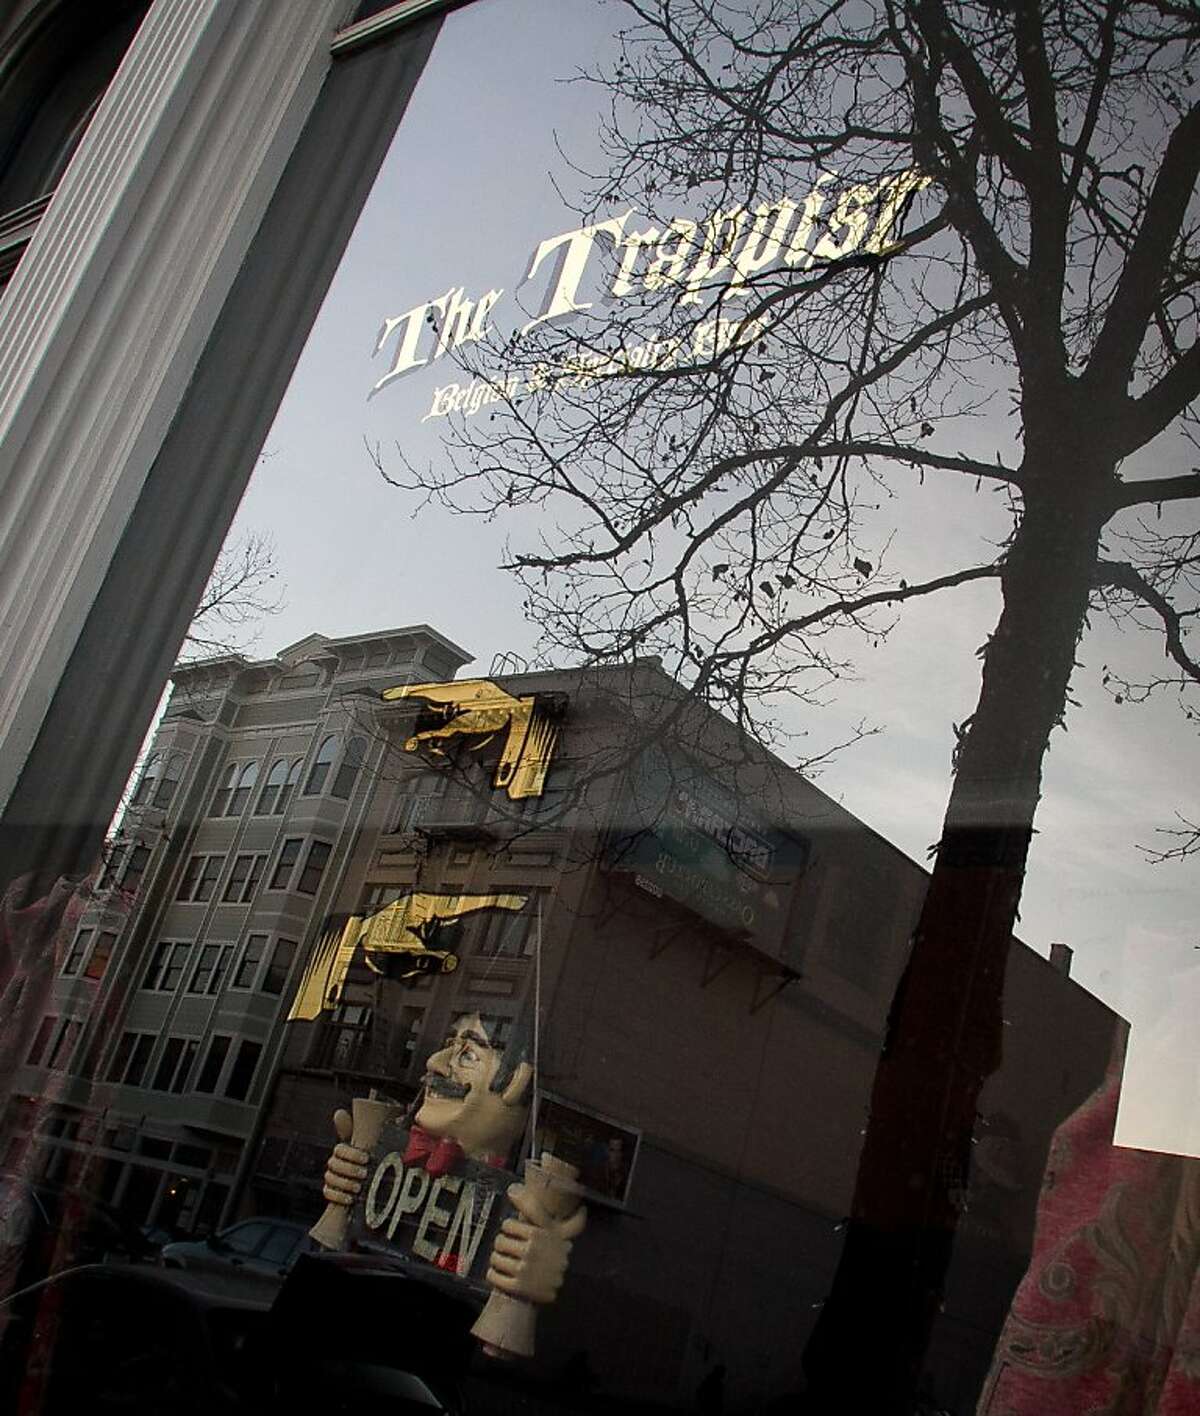 The exterior of Trappist Bar in Oakland, Calif., is seen on Tuesday, December 20th, 2011.